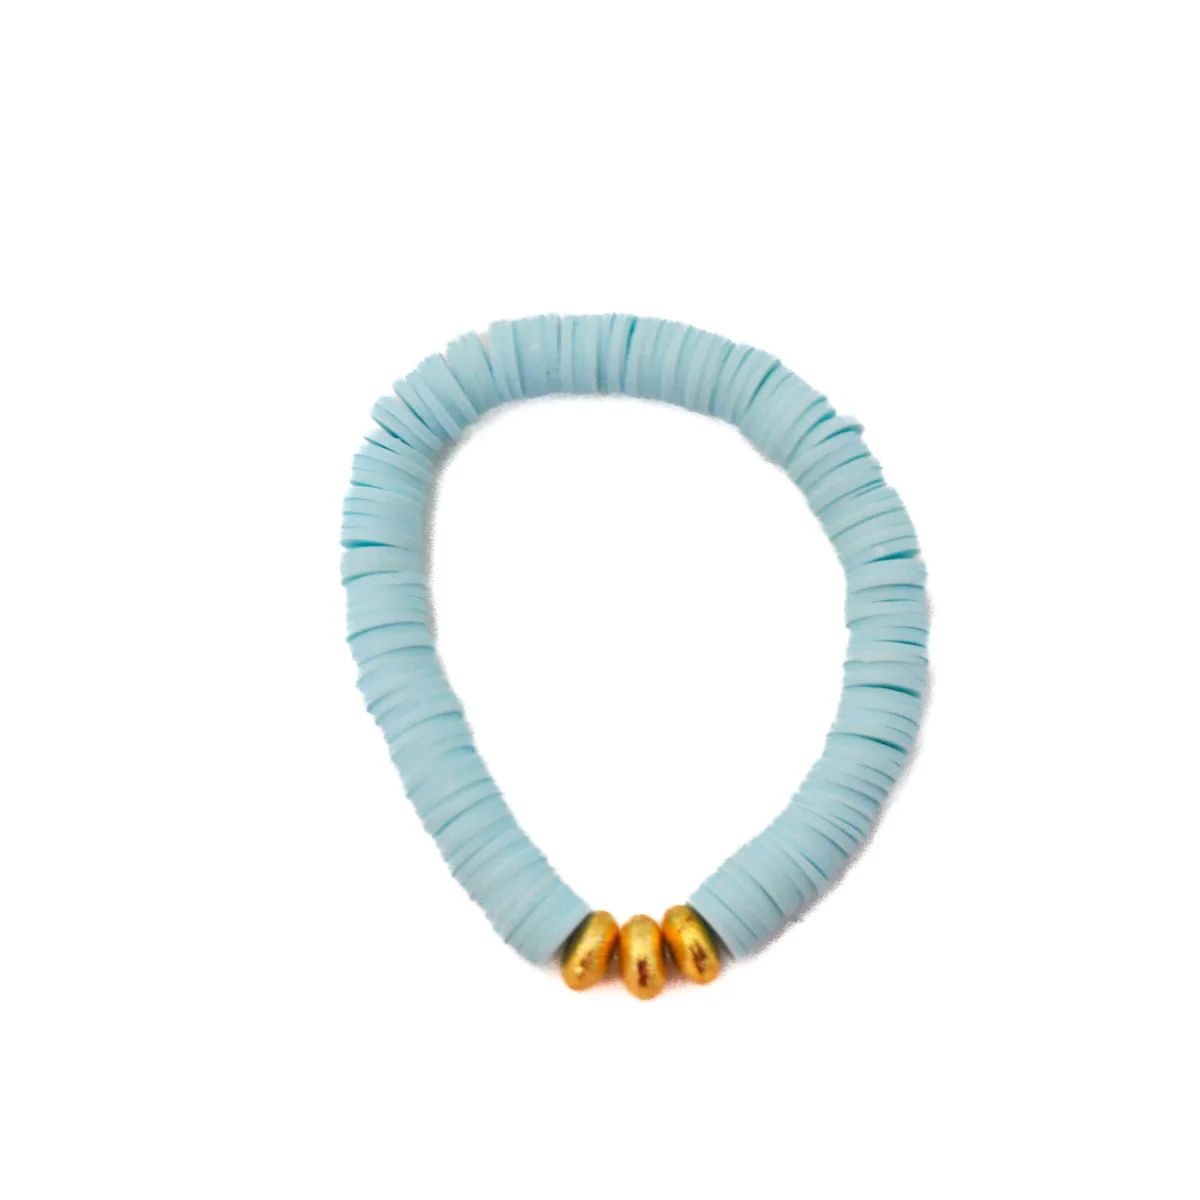 The Light Blue Chico | Cocos Beads and Co